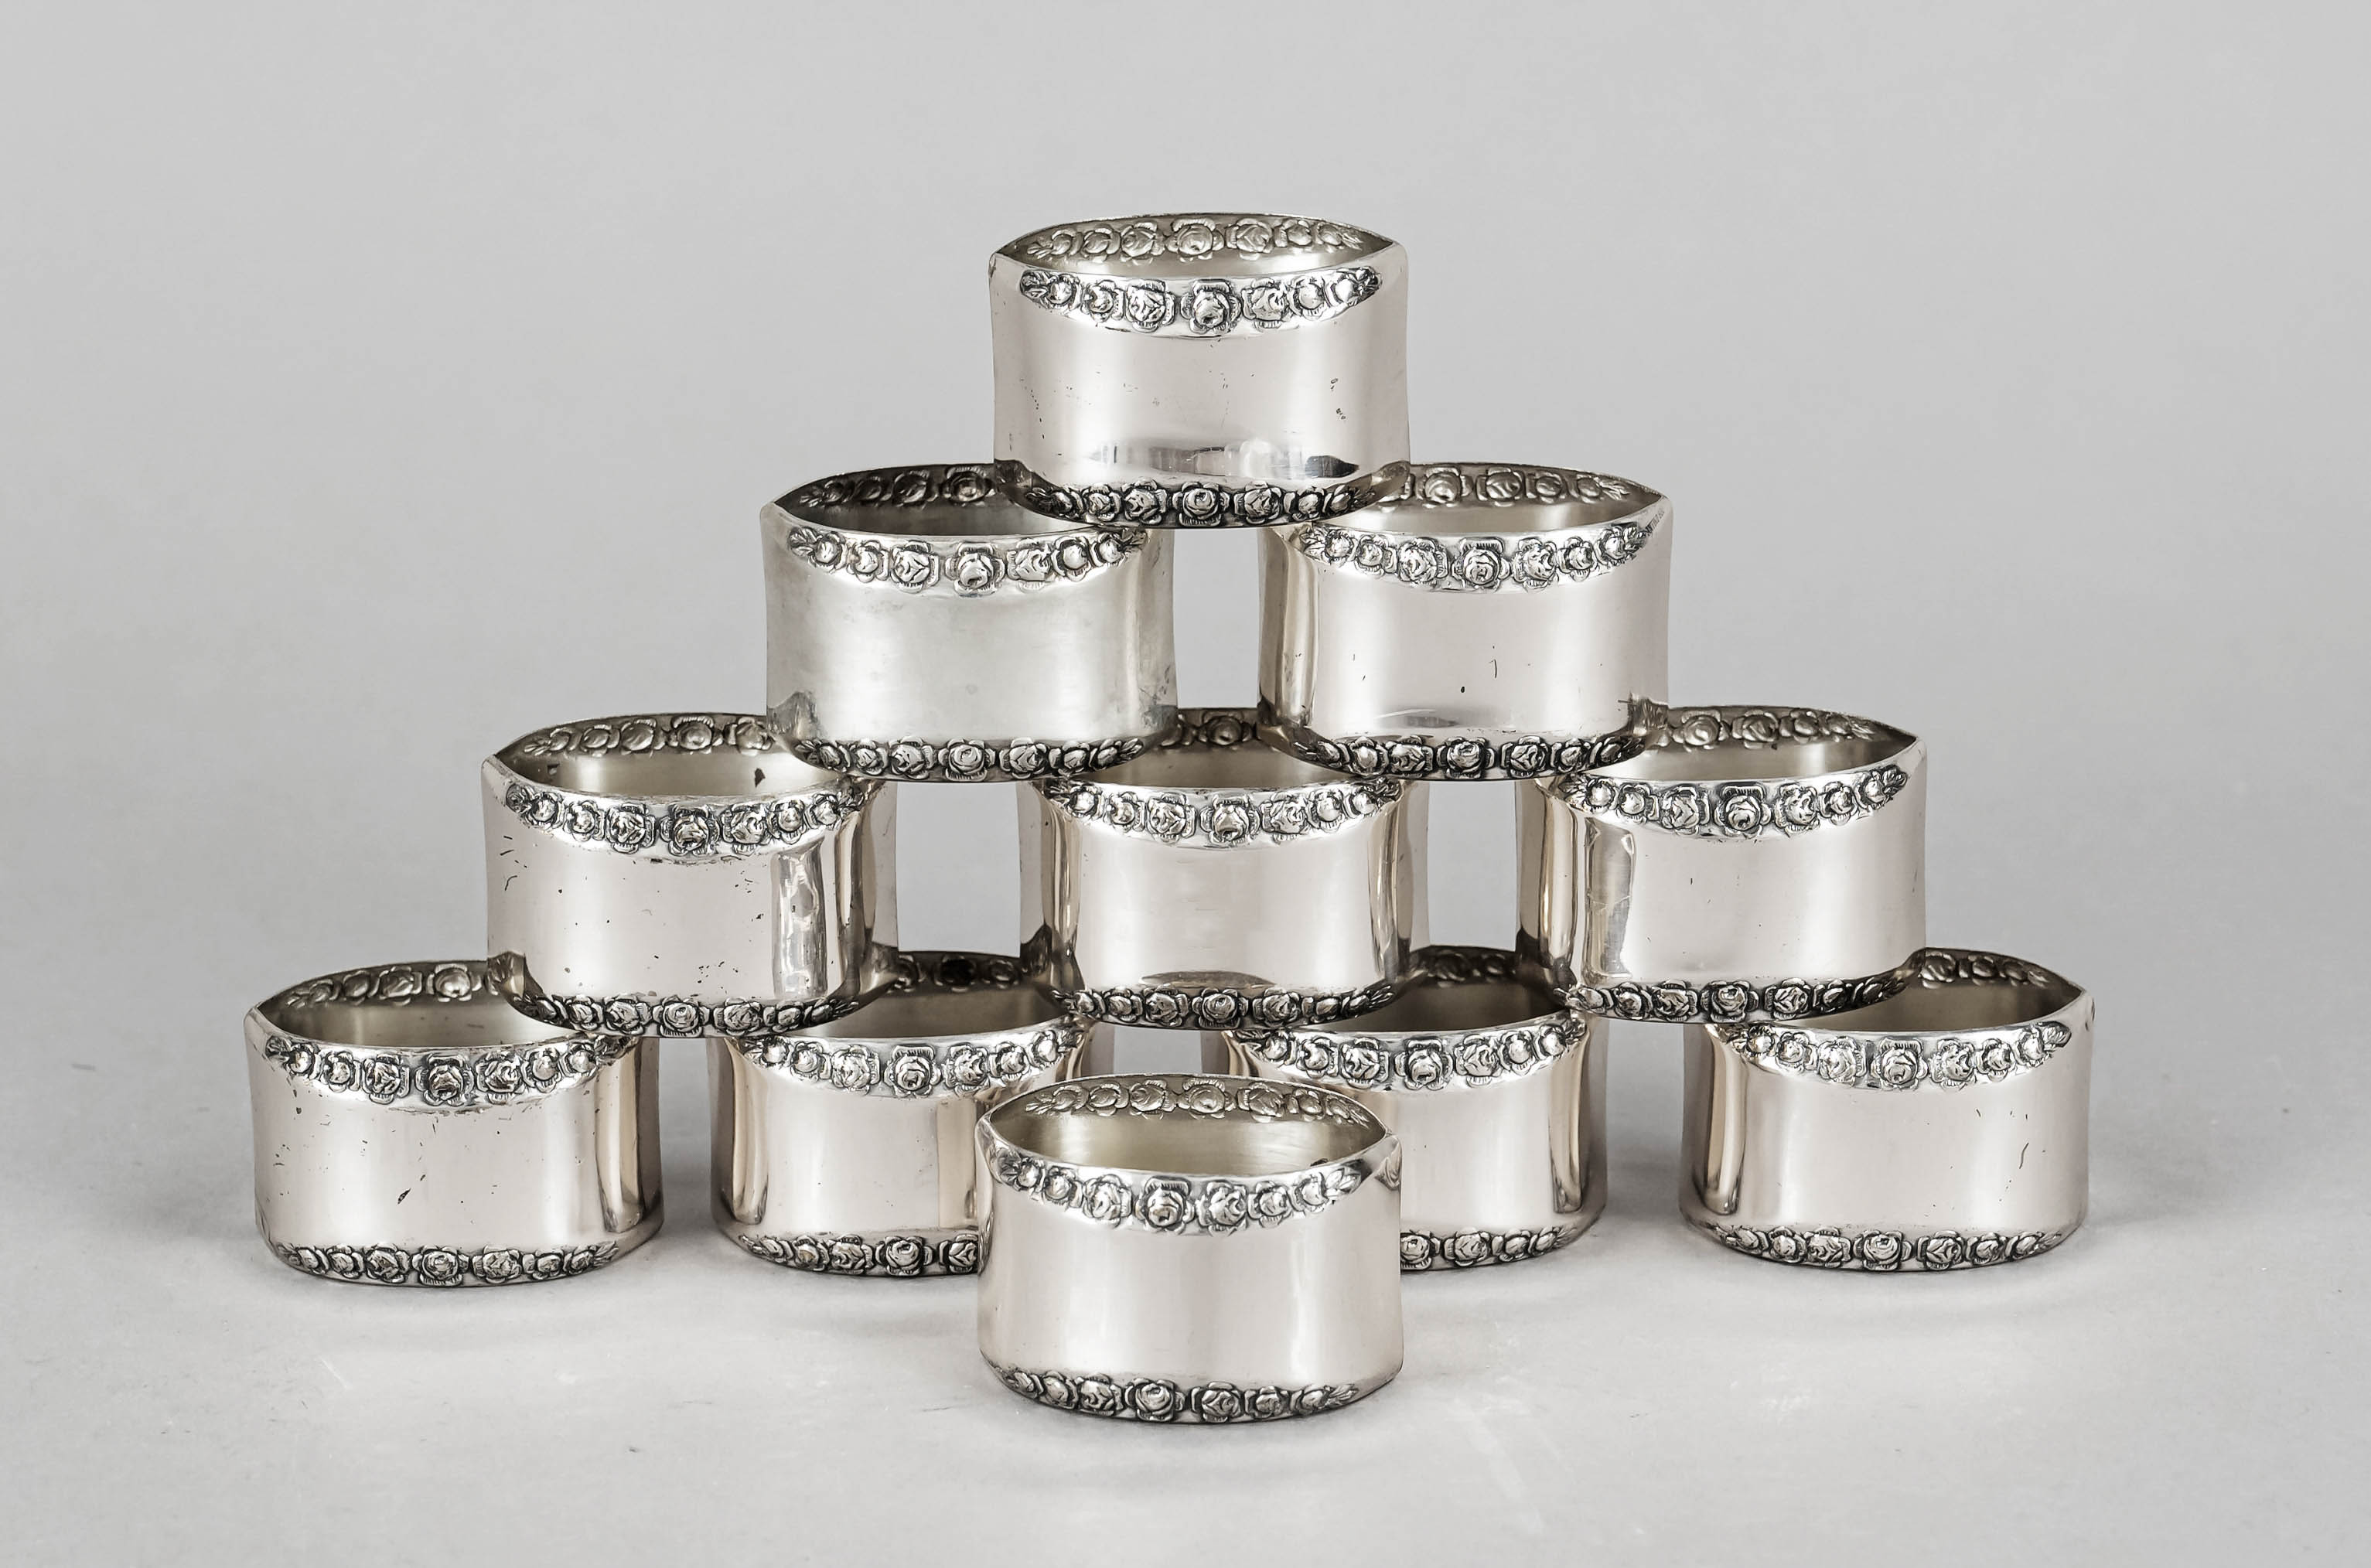 Eleven napkin rings, 20th century, marked Antiko, silver 800/000, oval shape, with relief